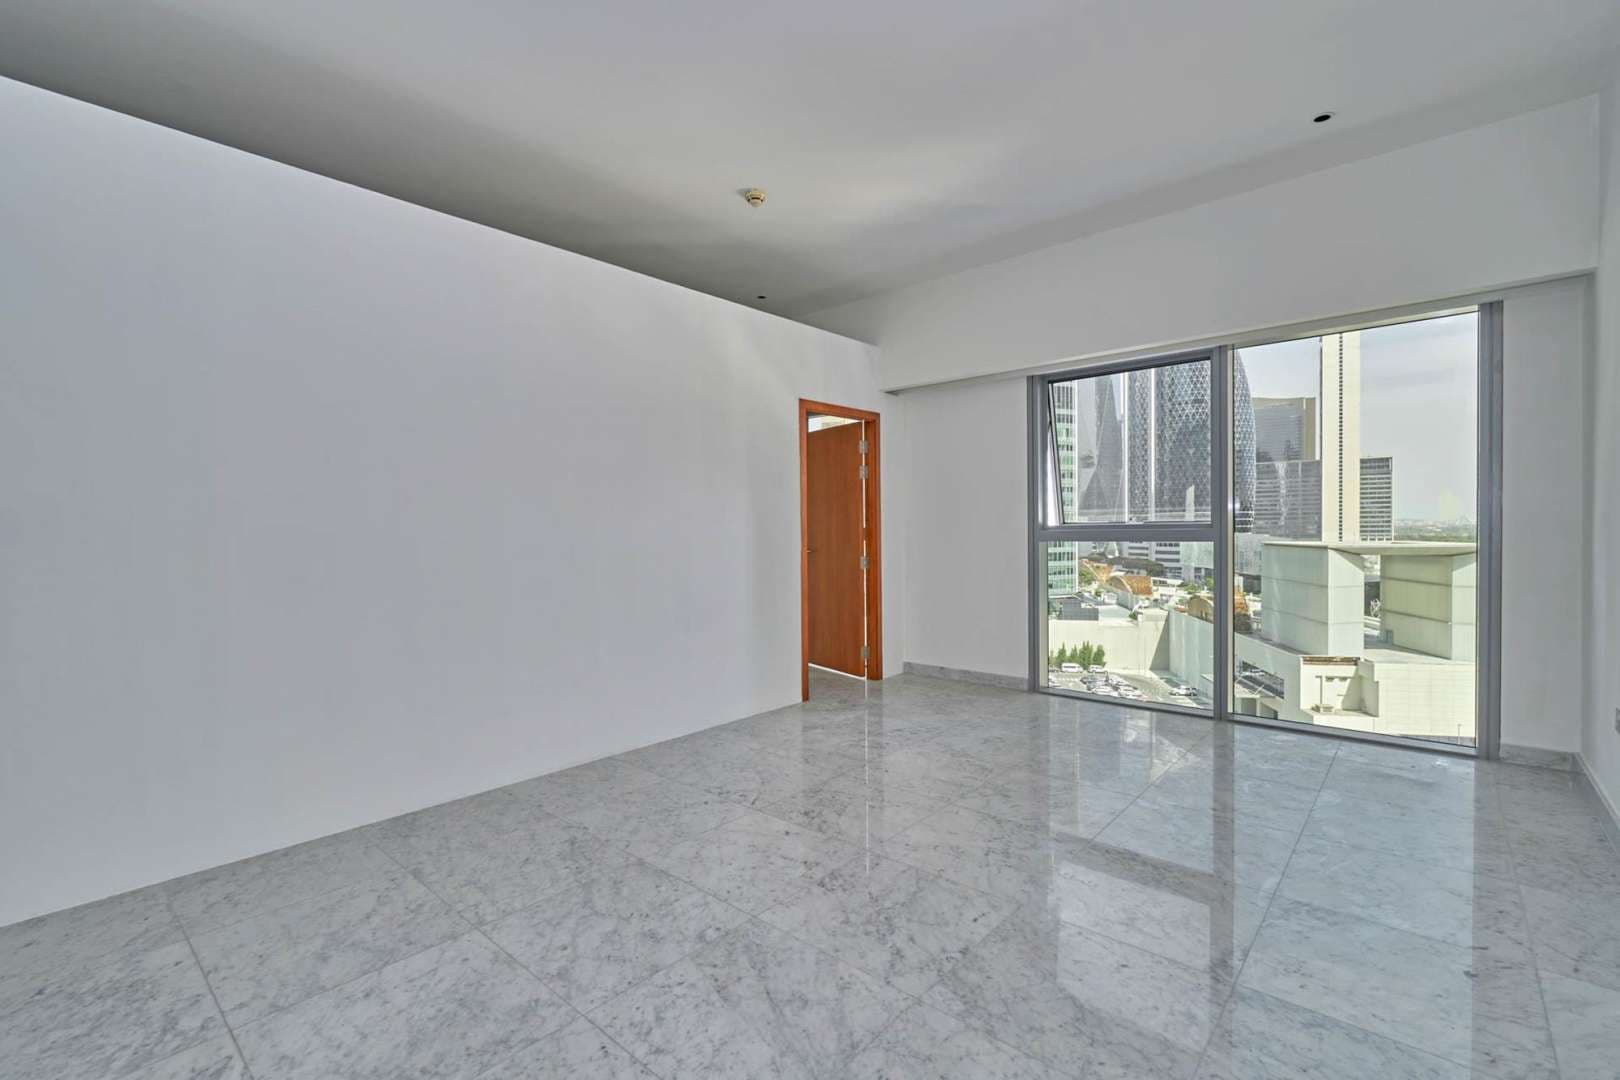 1 Bedroom Apartment For Rent Central Park Tower Lp05835 1b5775b8d8a78800.jpg